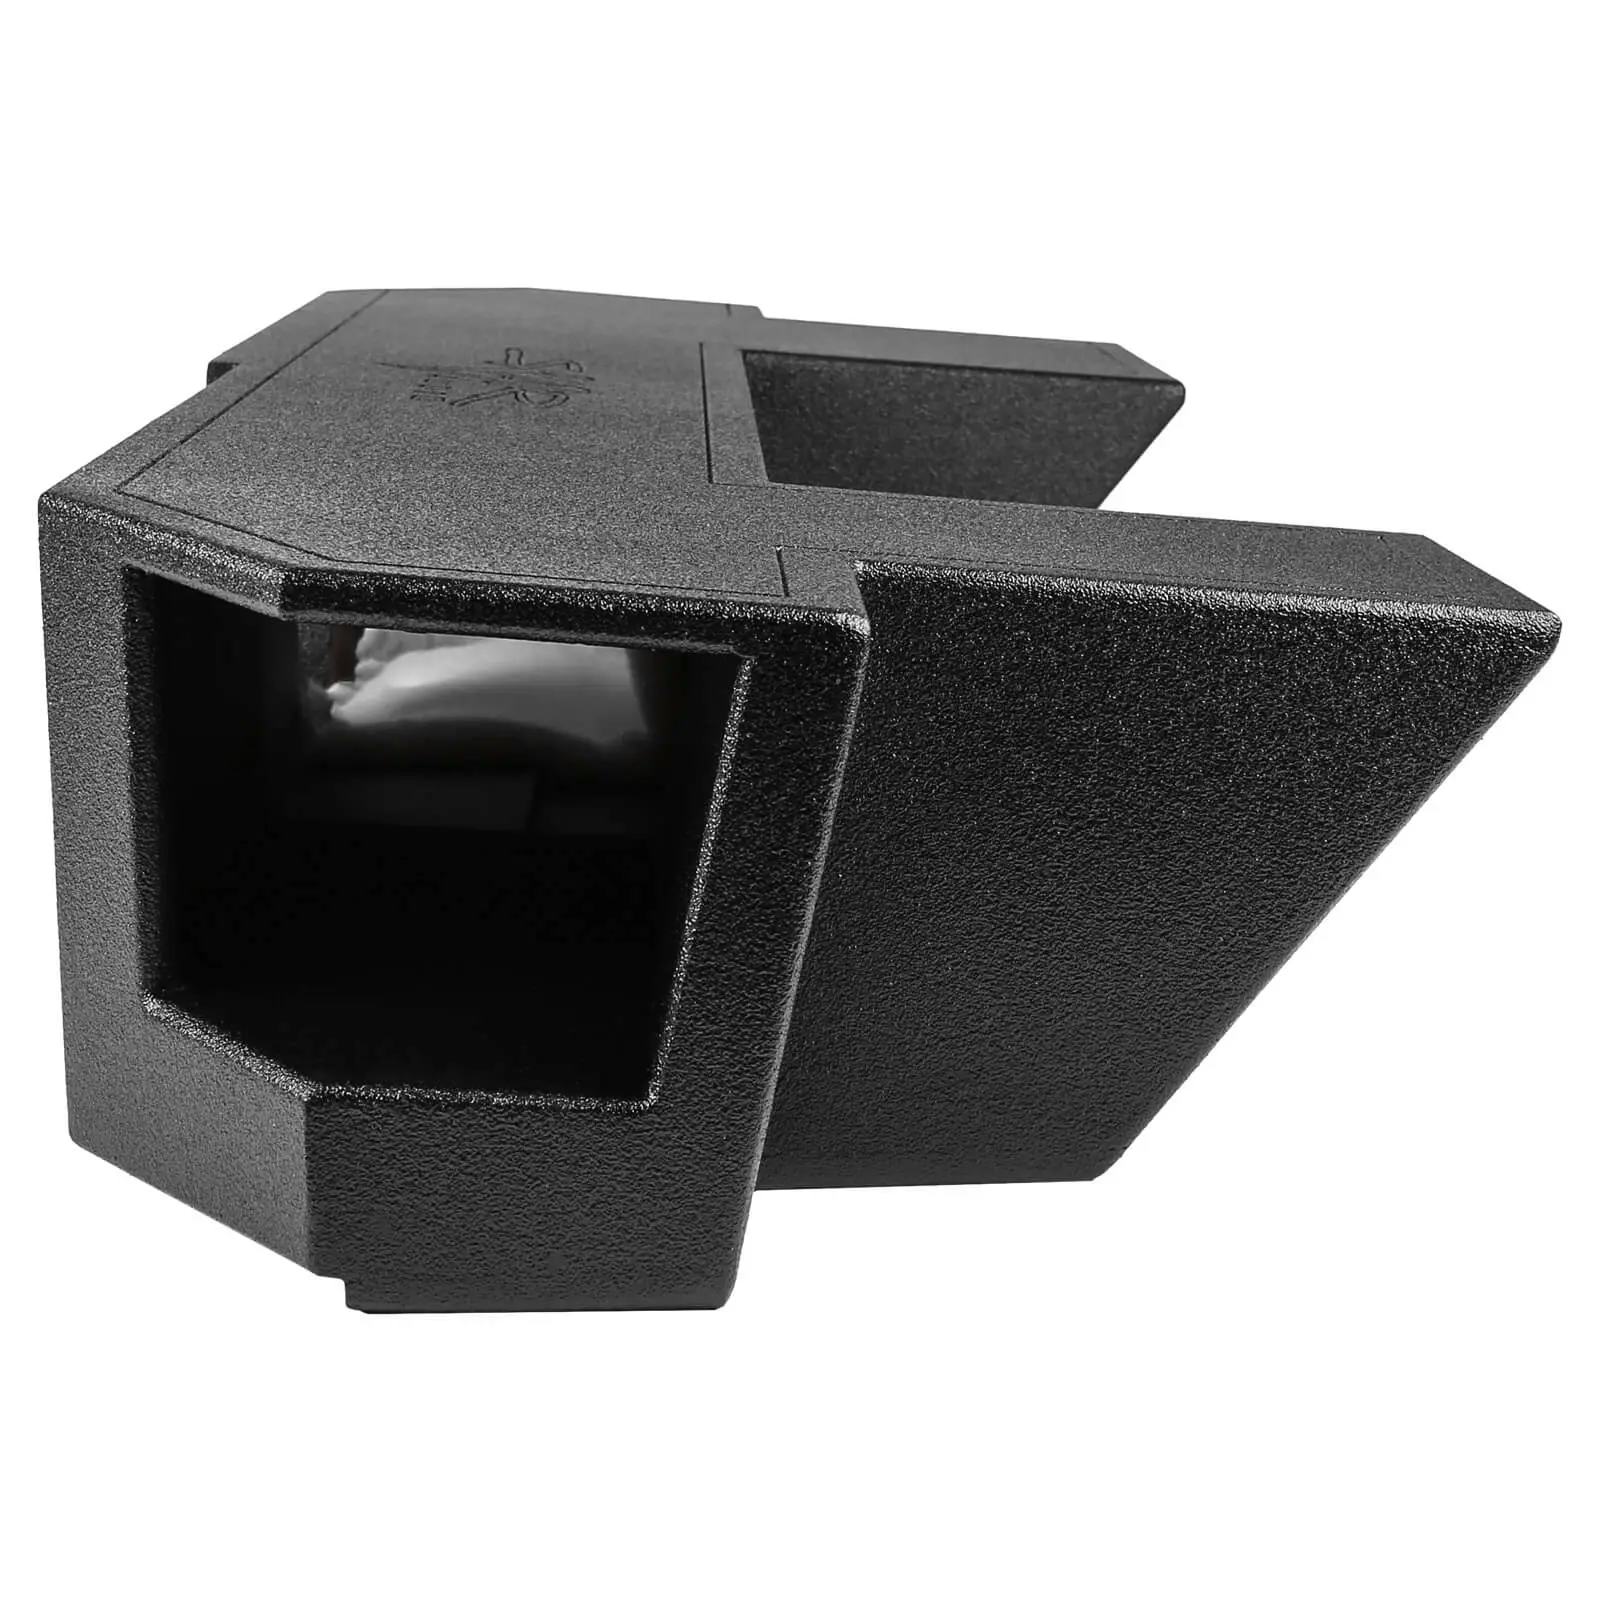 2019-2024 Ram 1500 (5th Gen) Crew Cab Compatible Dual 8" Ported Armor Coated Subwoofer Enclosure #4